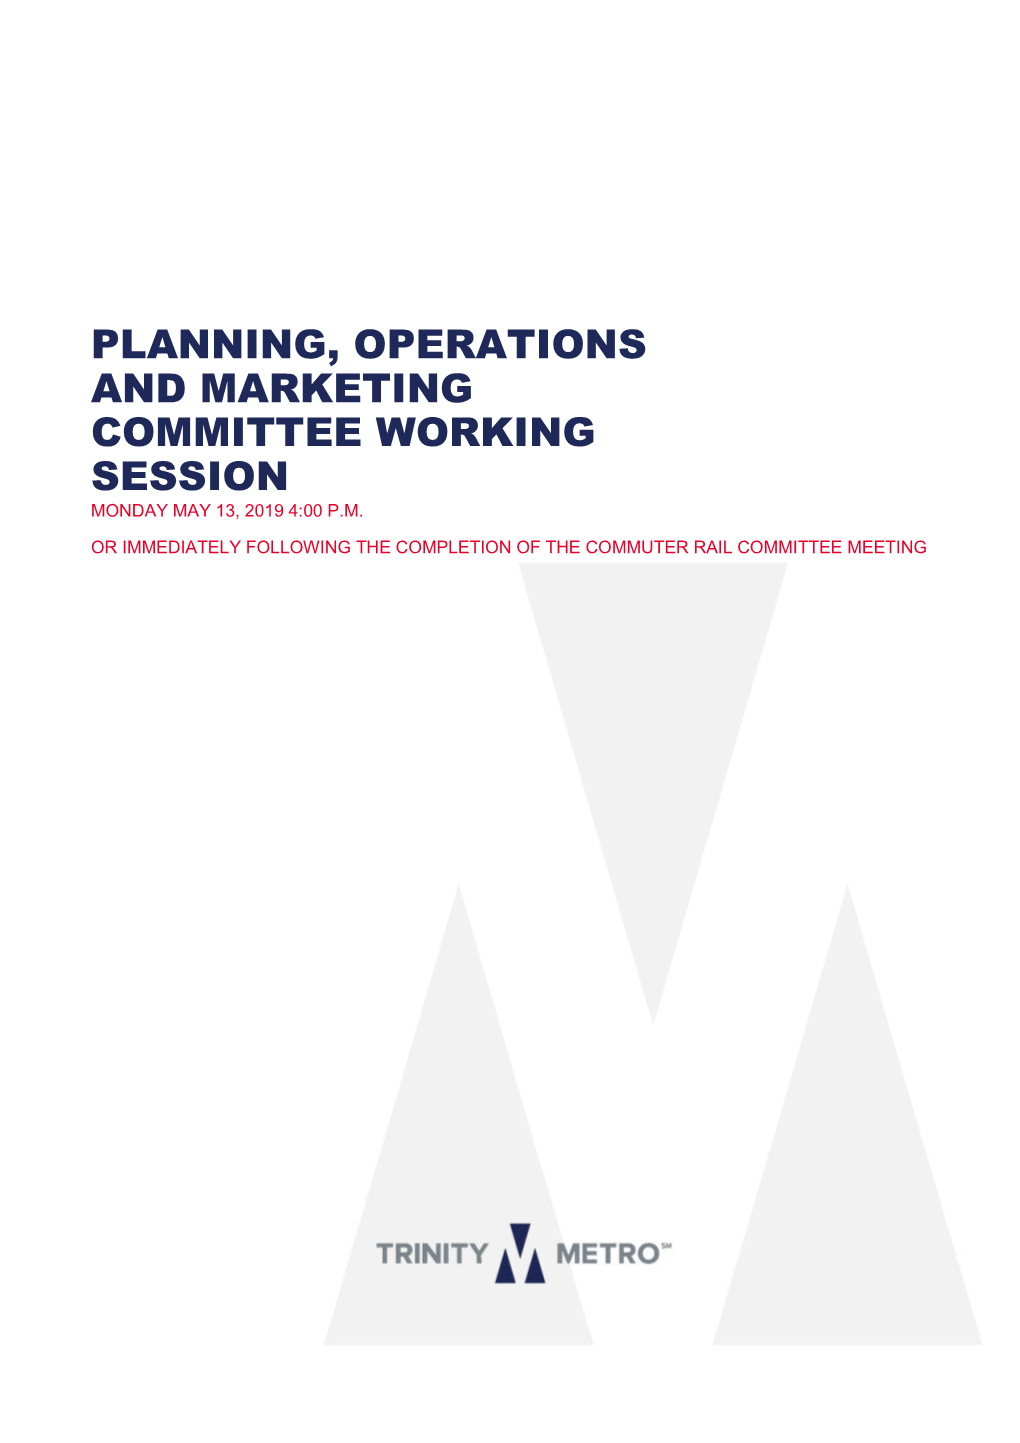 Planning, Operations and Marketing Committee Working Session Monday May 13, 2019 4:00 P.M